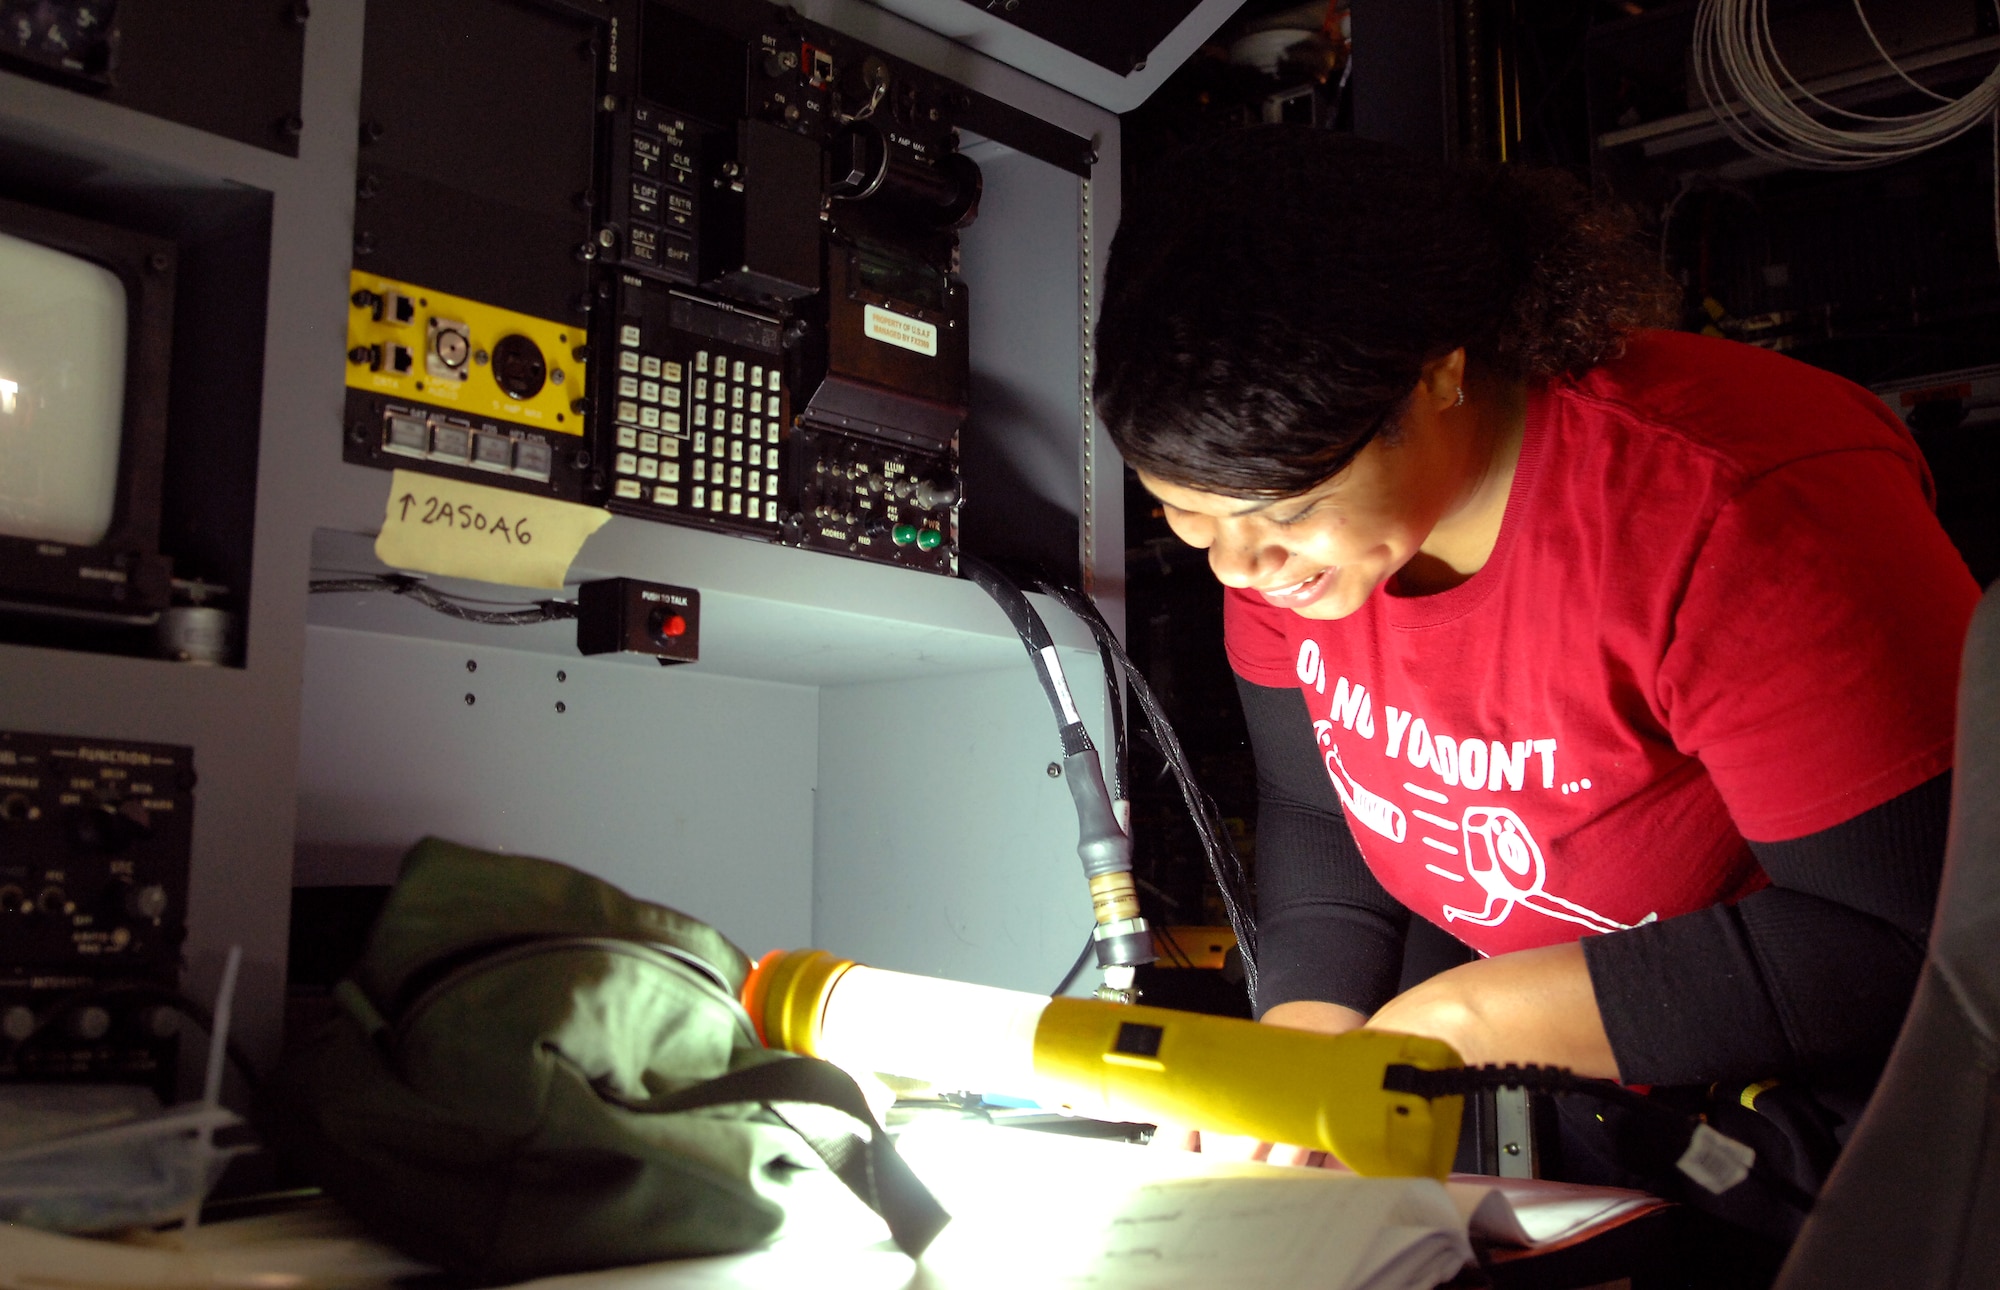 Jennifer Sanchez, an aircraft mechanic and electrician with L-3 Communications, examines a wiring diagram while installing upgrade equipment on board the Offutt Flight Trainer #3 Dec. 11 at Offutt Air Force Base, Neb. Sanchez and a team of engineers, mechanics and electricians from L-3 Communications were performing upgrades to the flight simulator that mirrors the RC-135 aircraft. (U.S. Air Force photo by Delanie Stafford/Released)